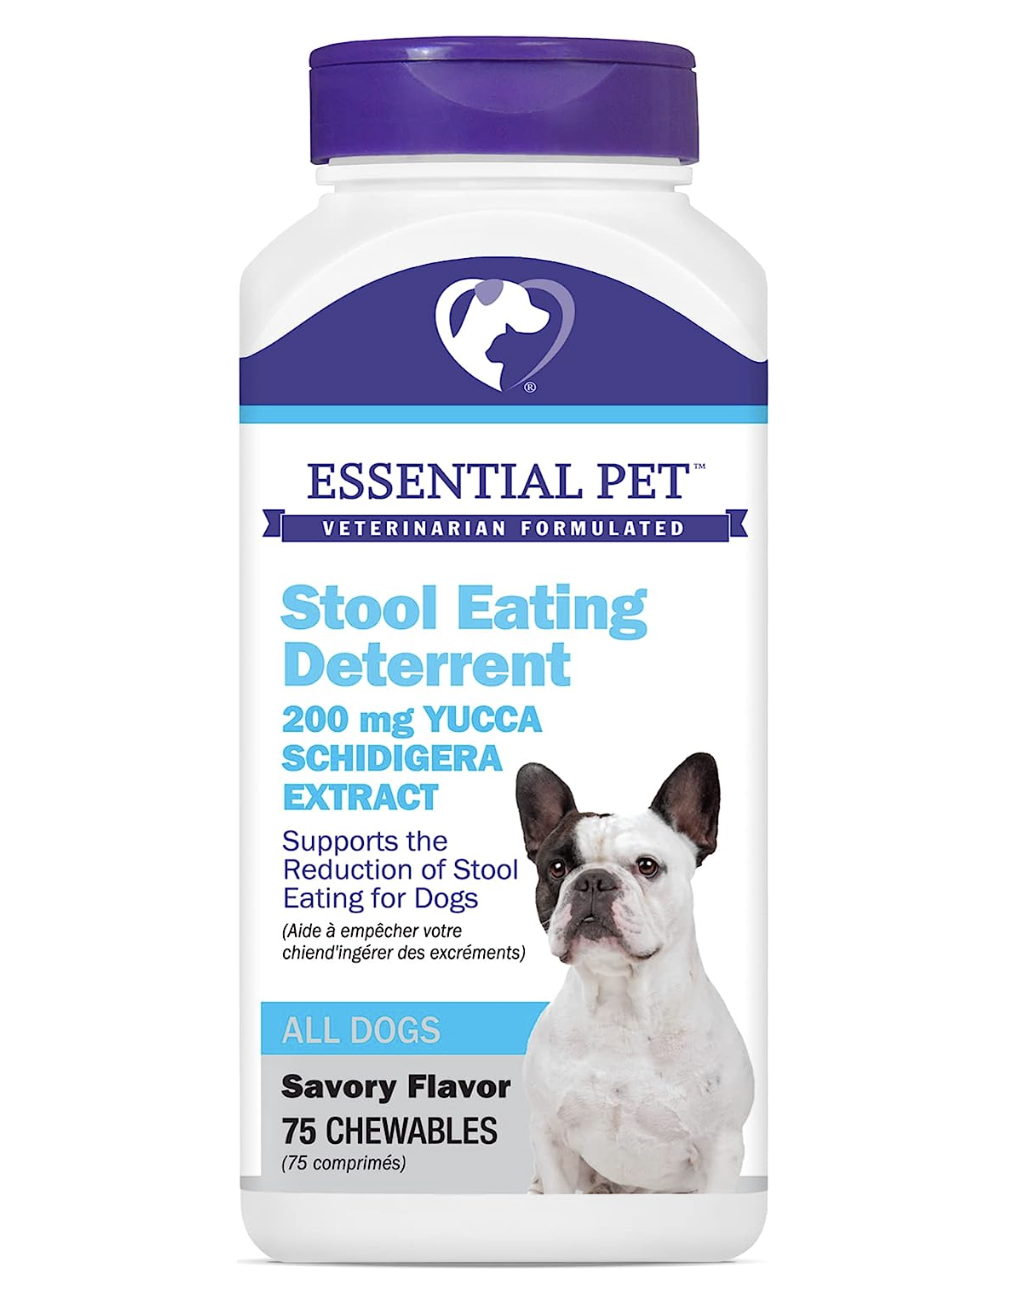 12. Stool Eating Deterrent with Yucca Schidigera Extract for Dogs